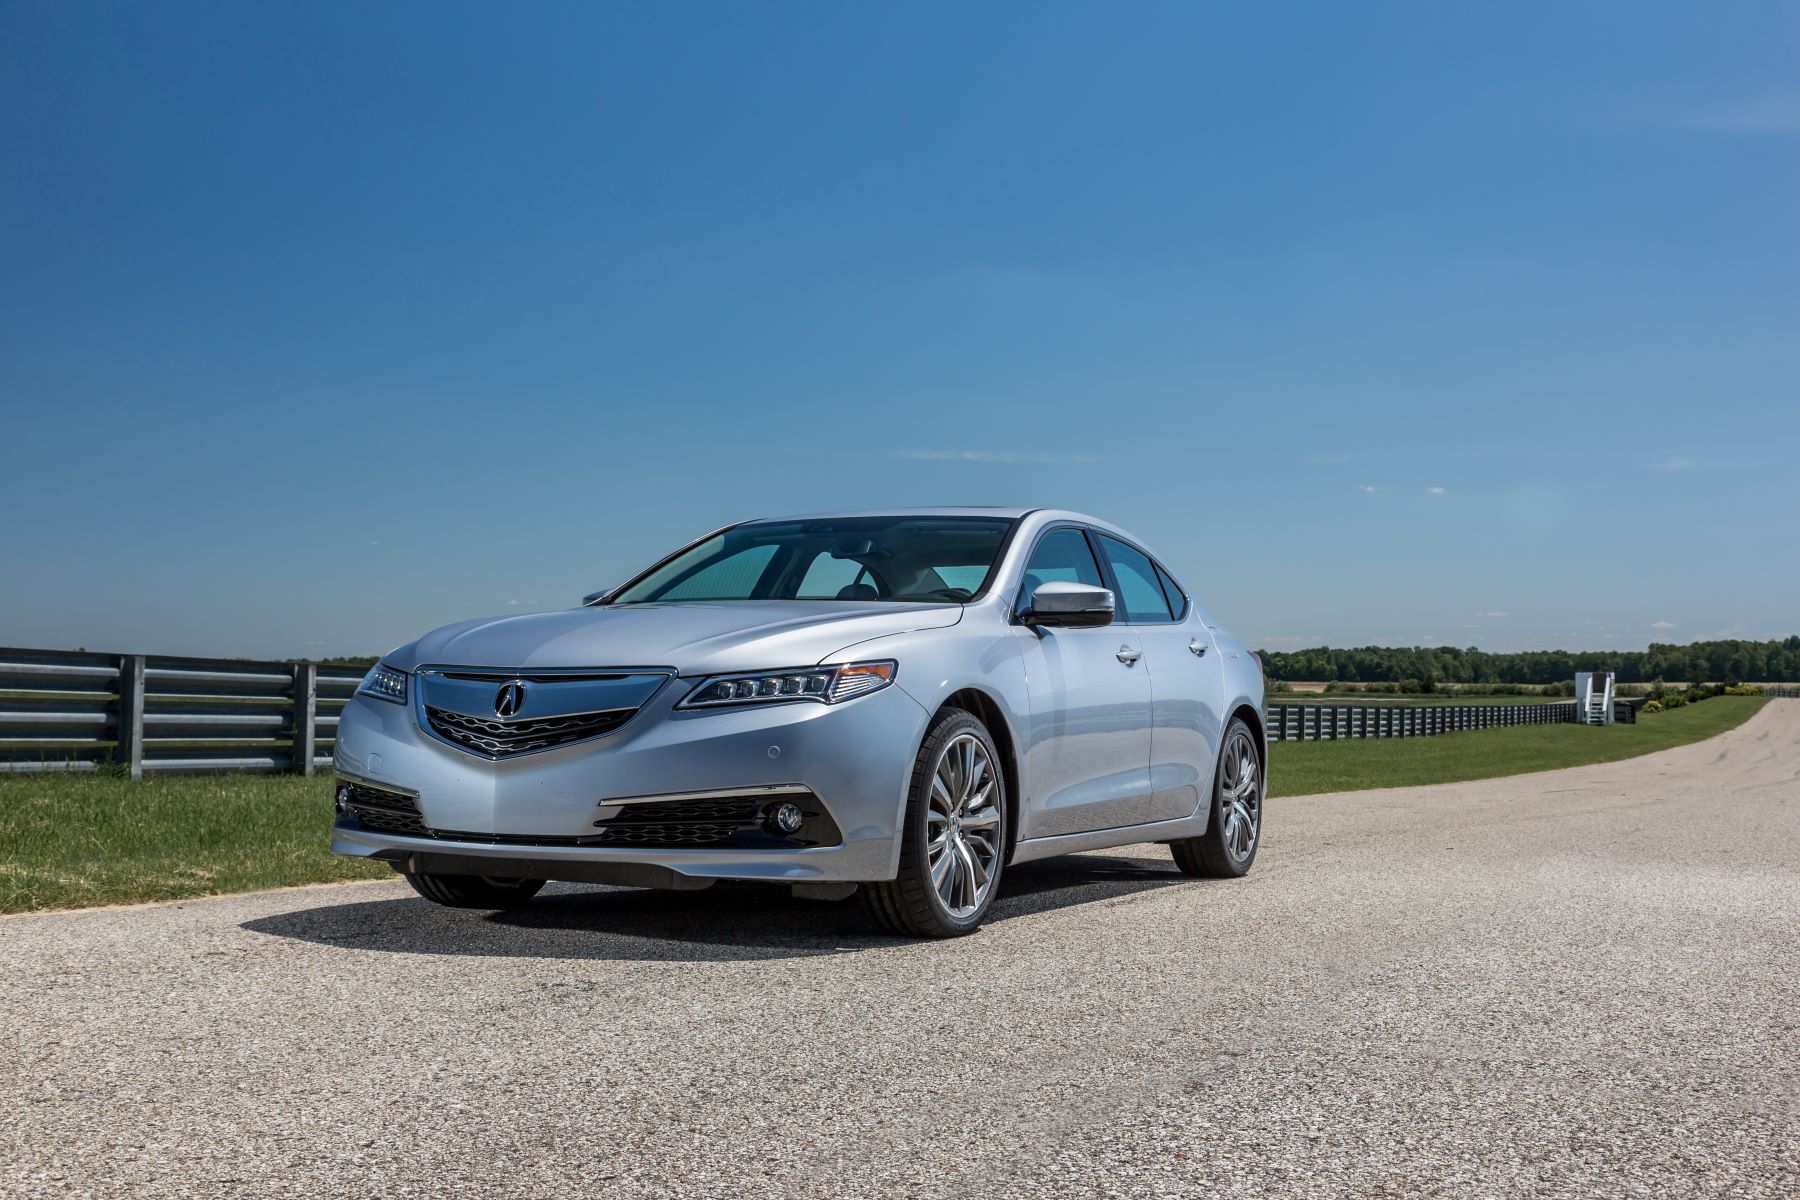 A 2015 Acura TLX entry-level luxury sedan model parked on a gravel road near metal fencing on a farm